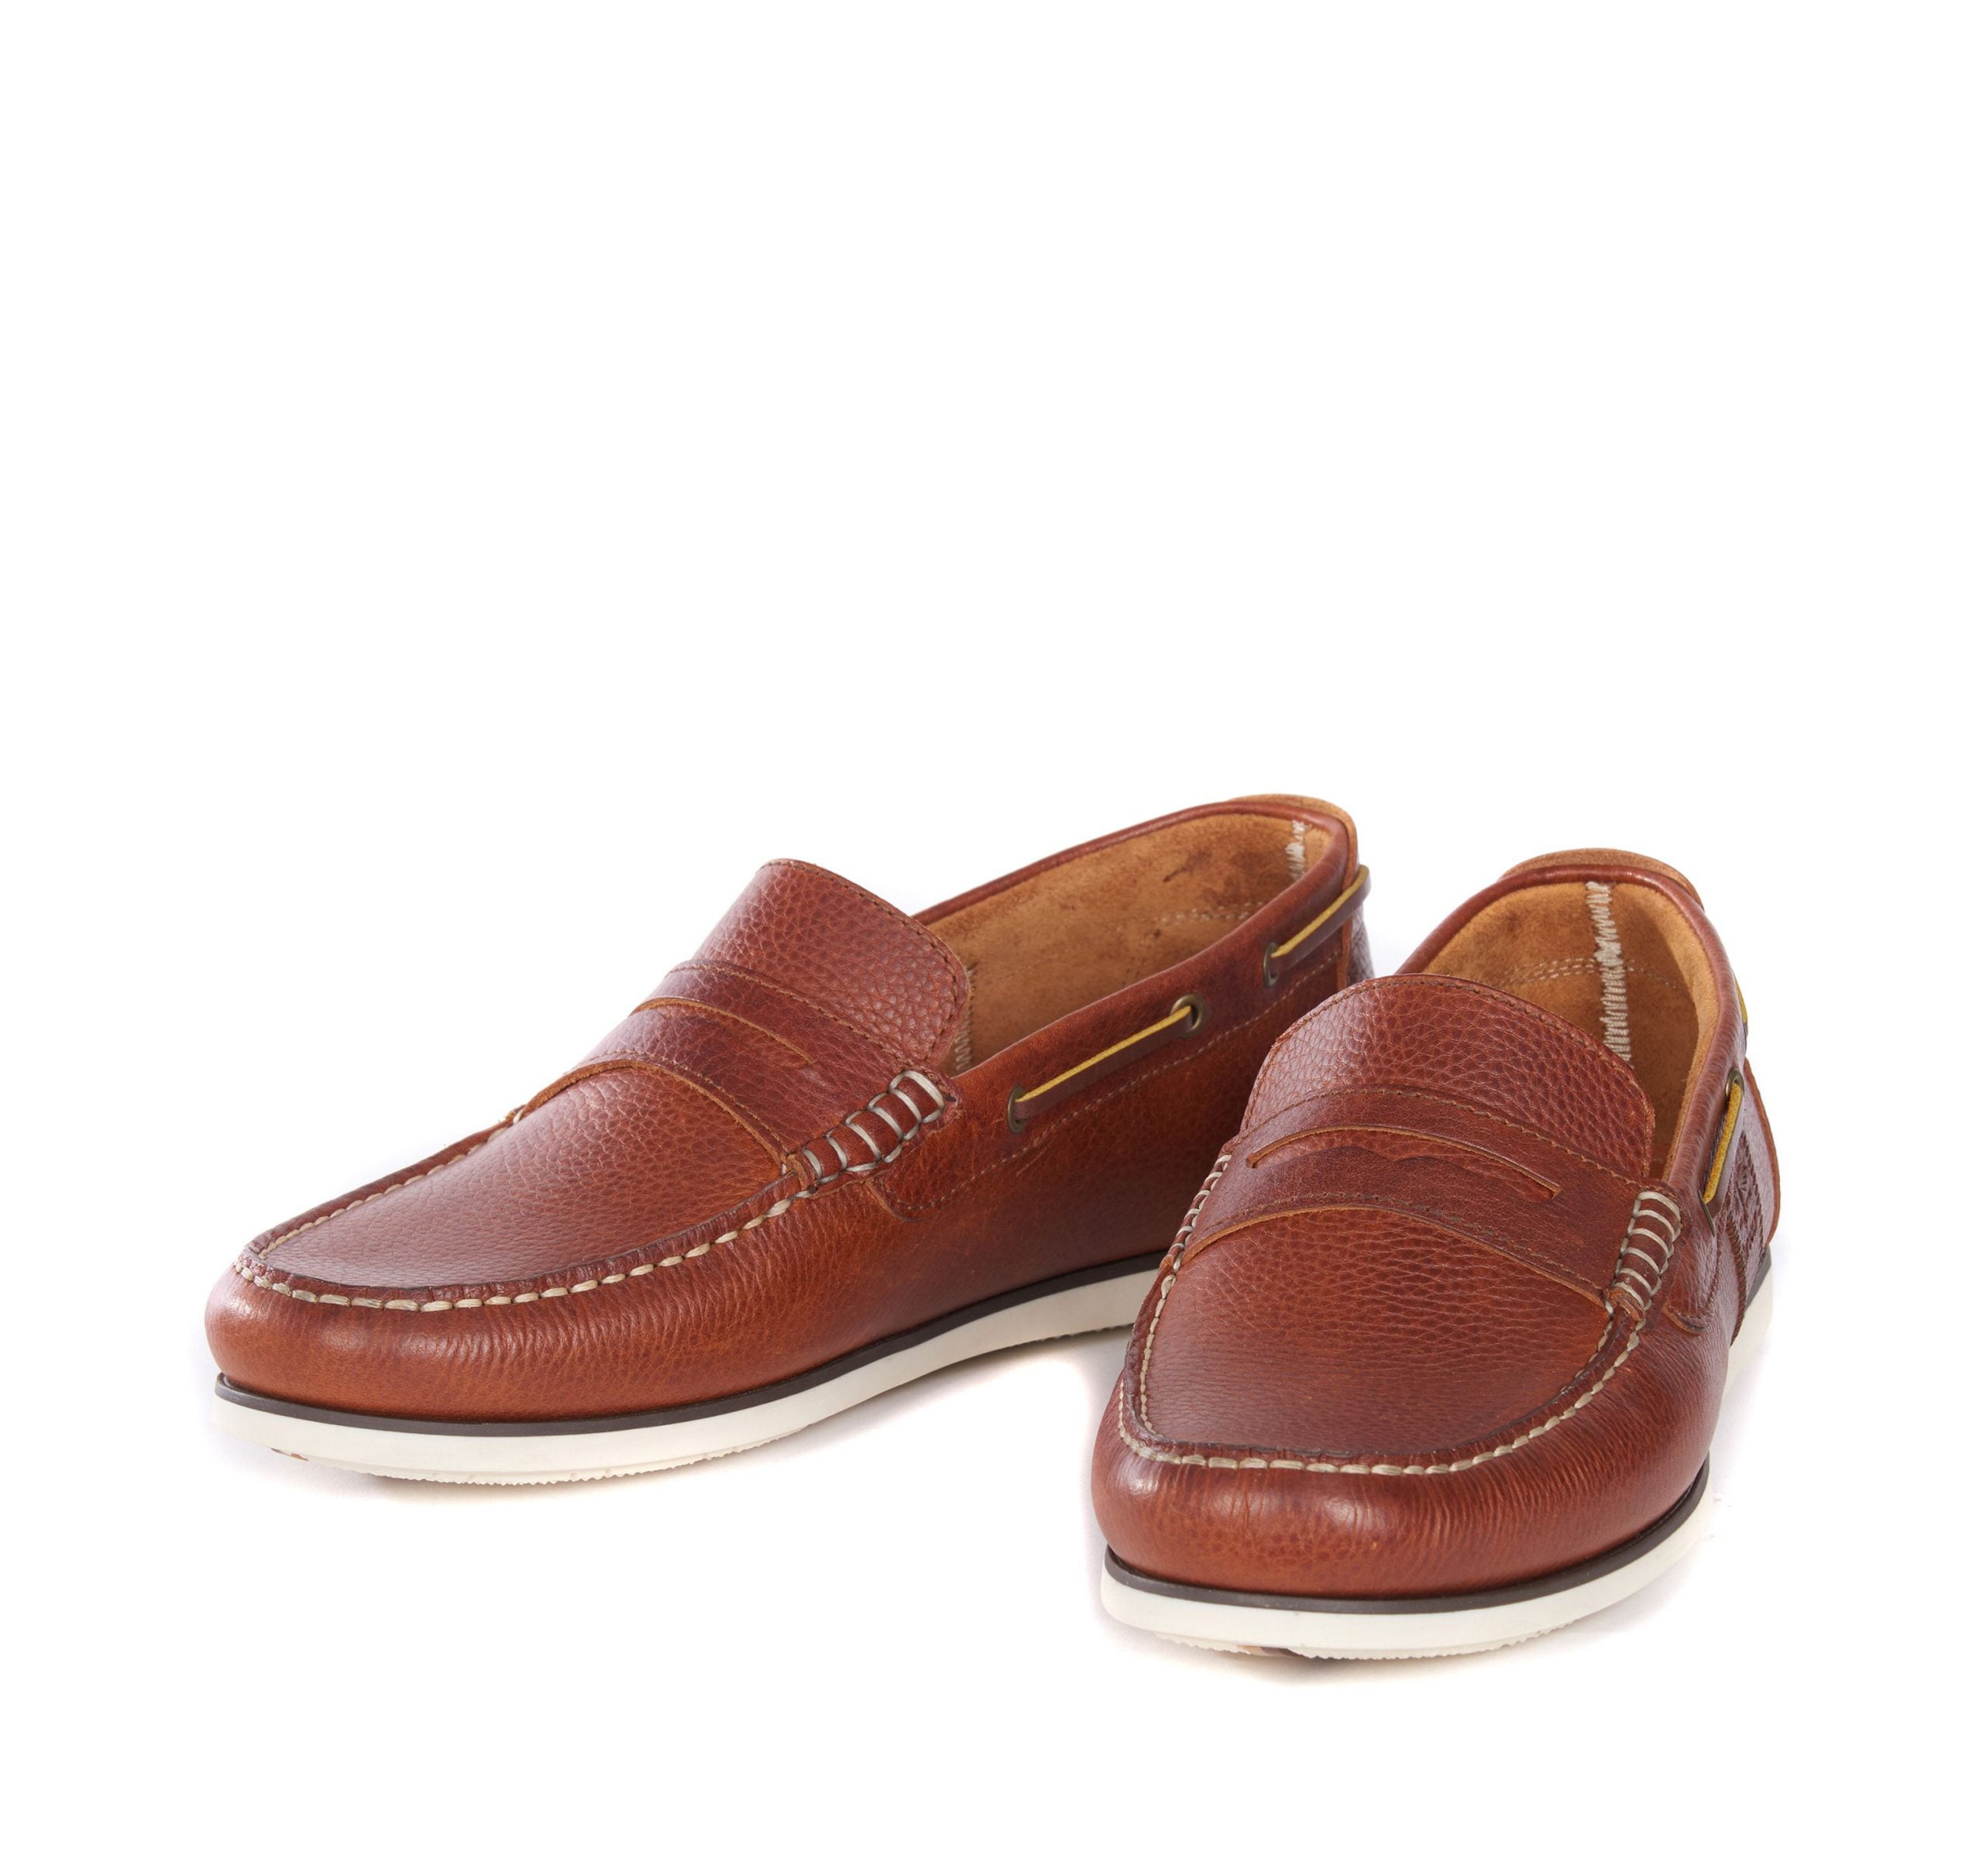 Barbour Keel Boat ShoesO0388TA51_ss19_back_1